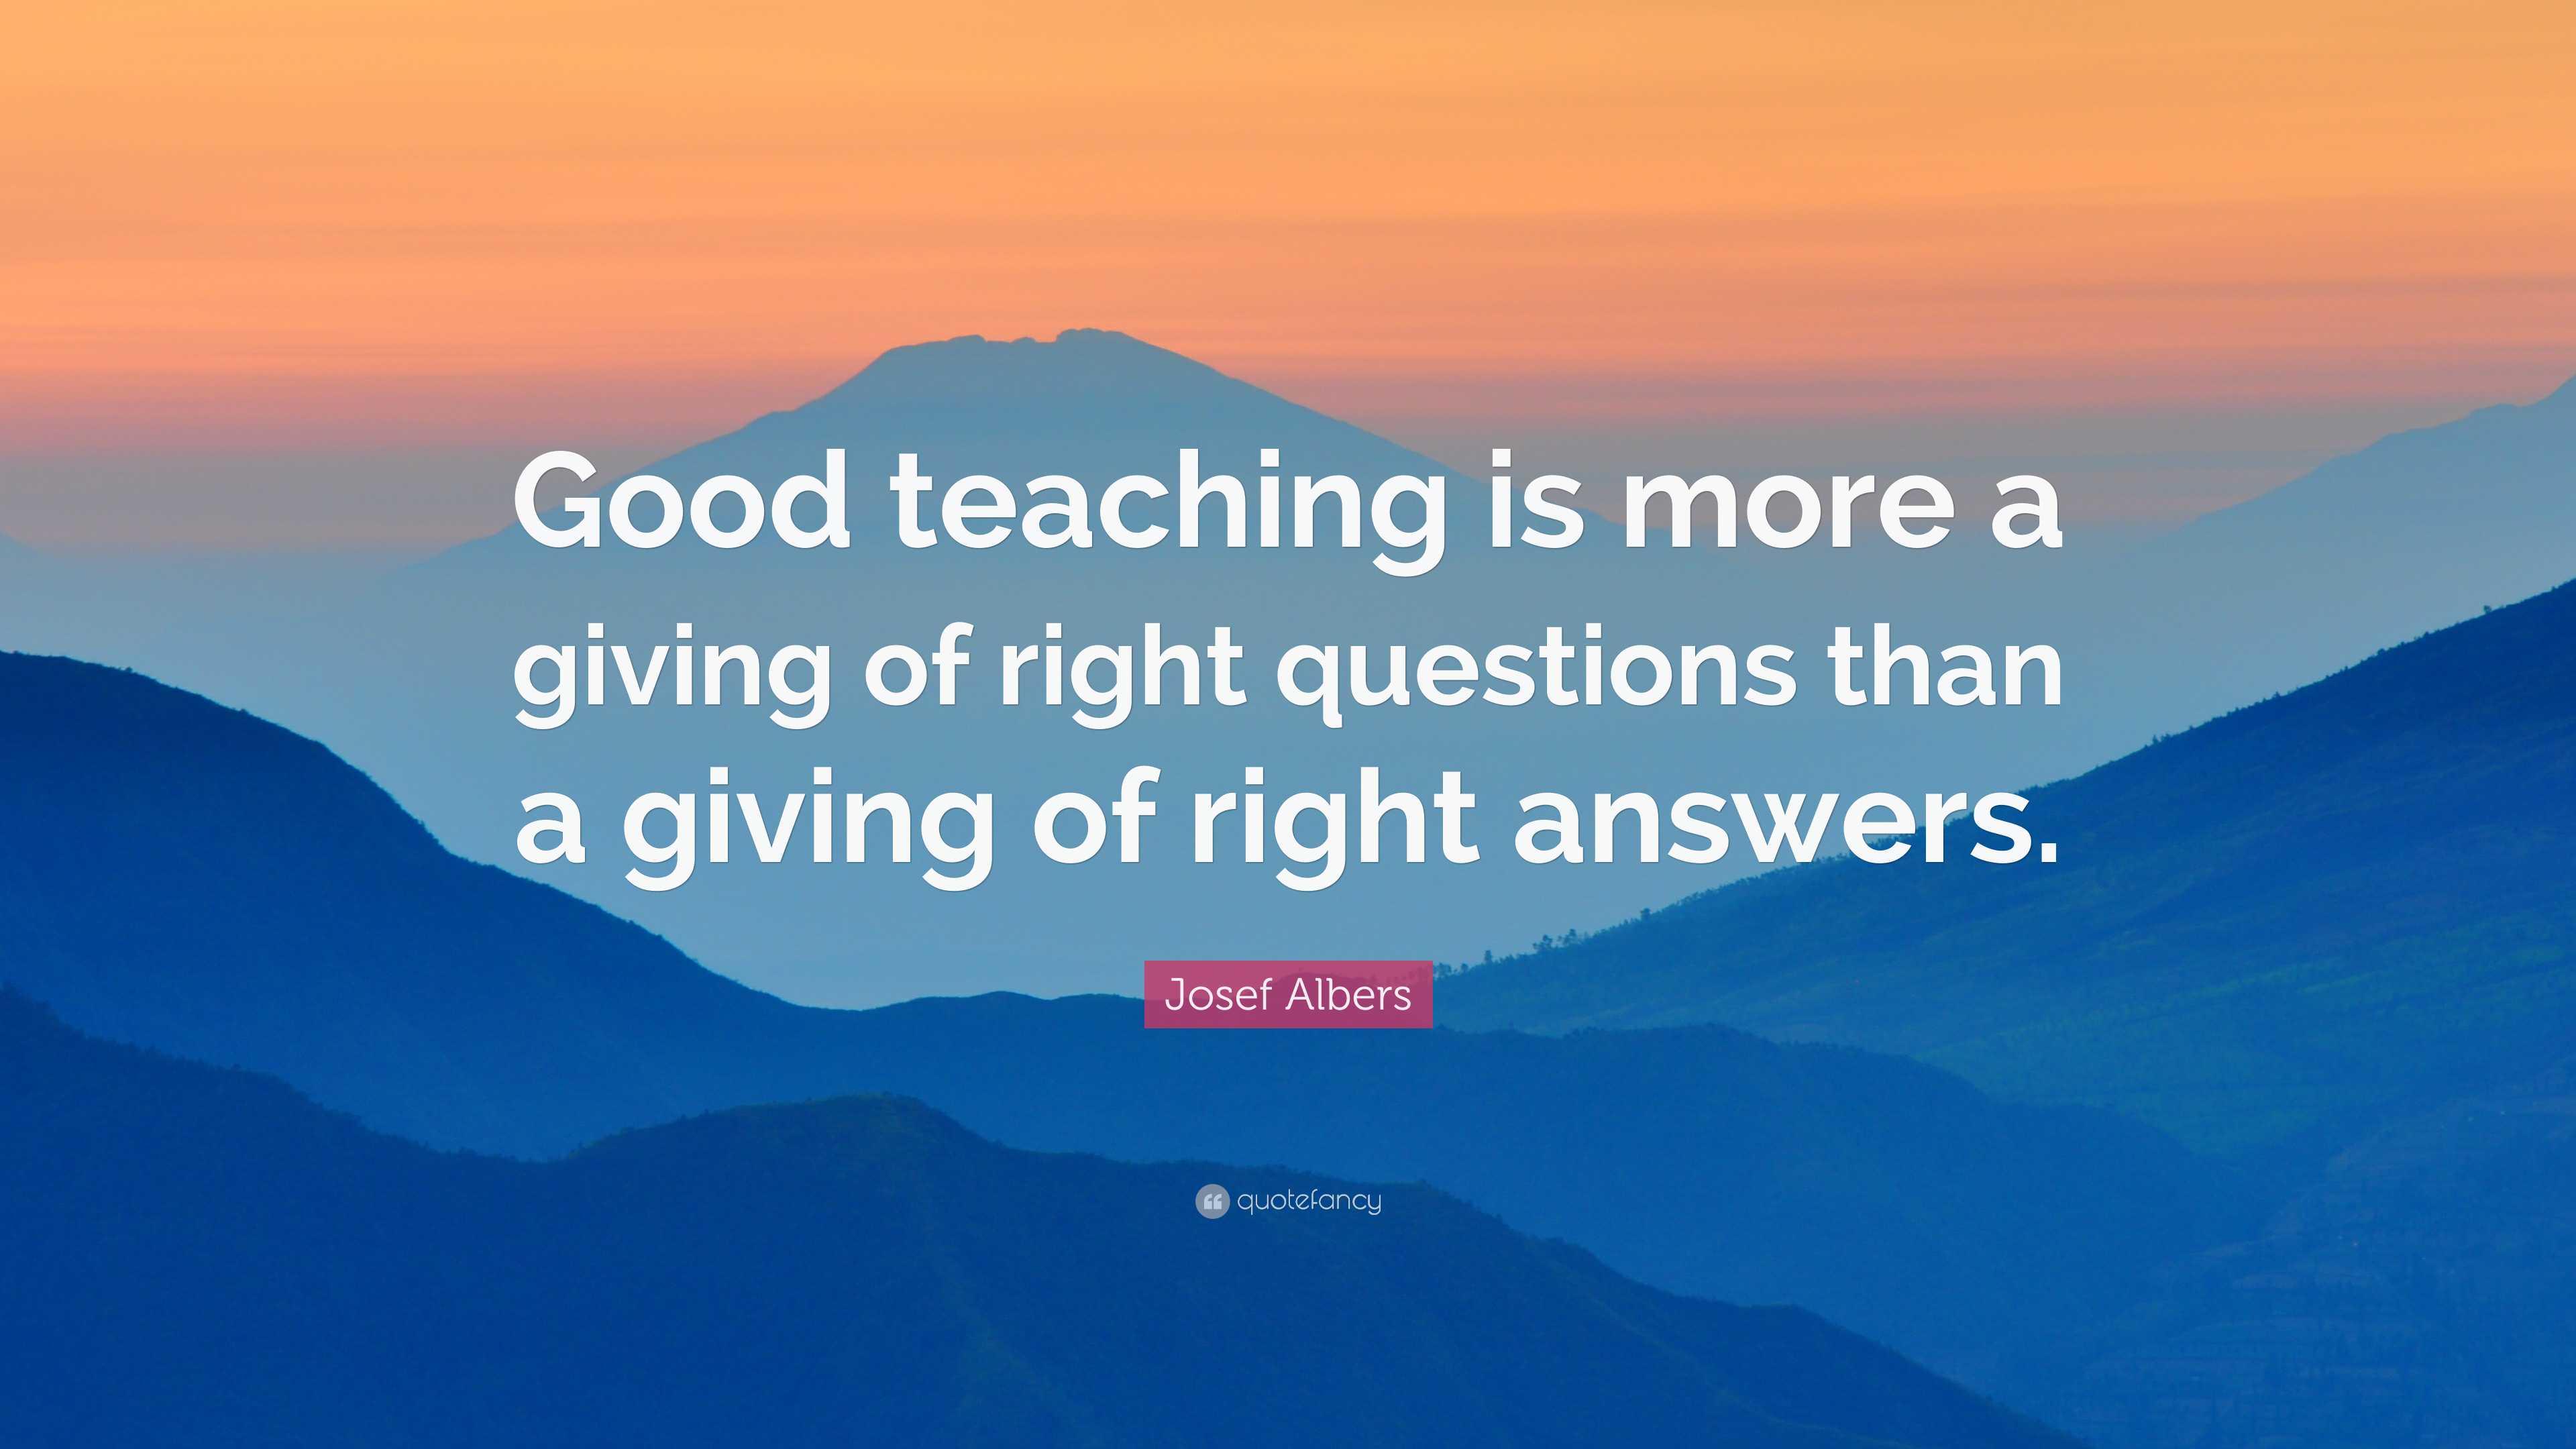 Josef Albers Quote: “Good teaching is more a giving of right questions ...